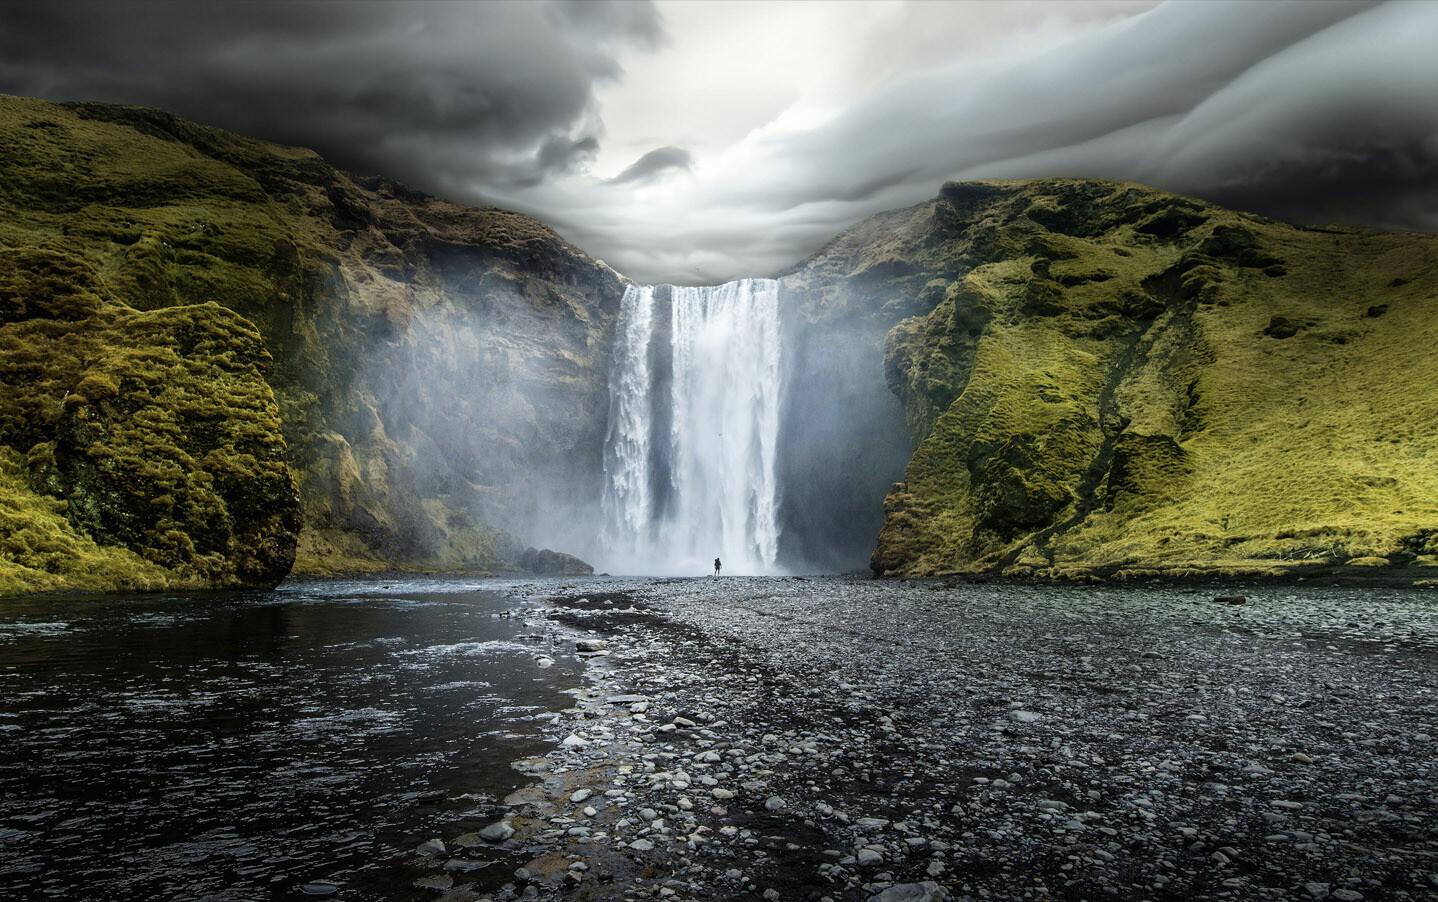 Get Some Great Images of Iceland